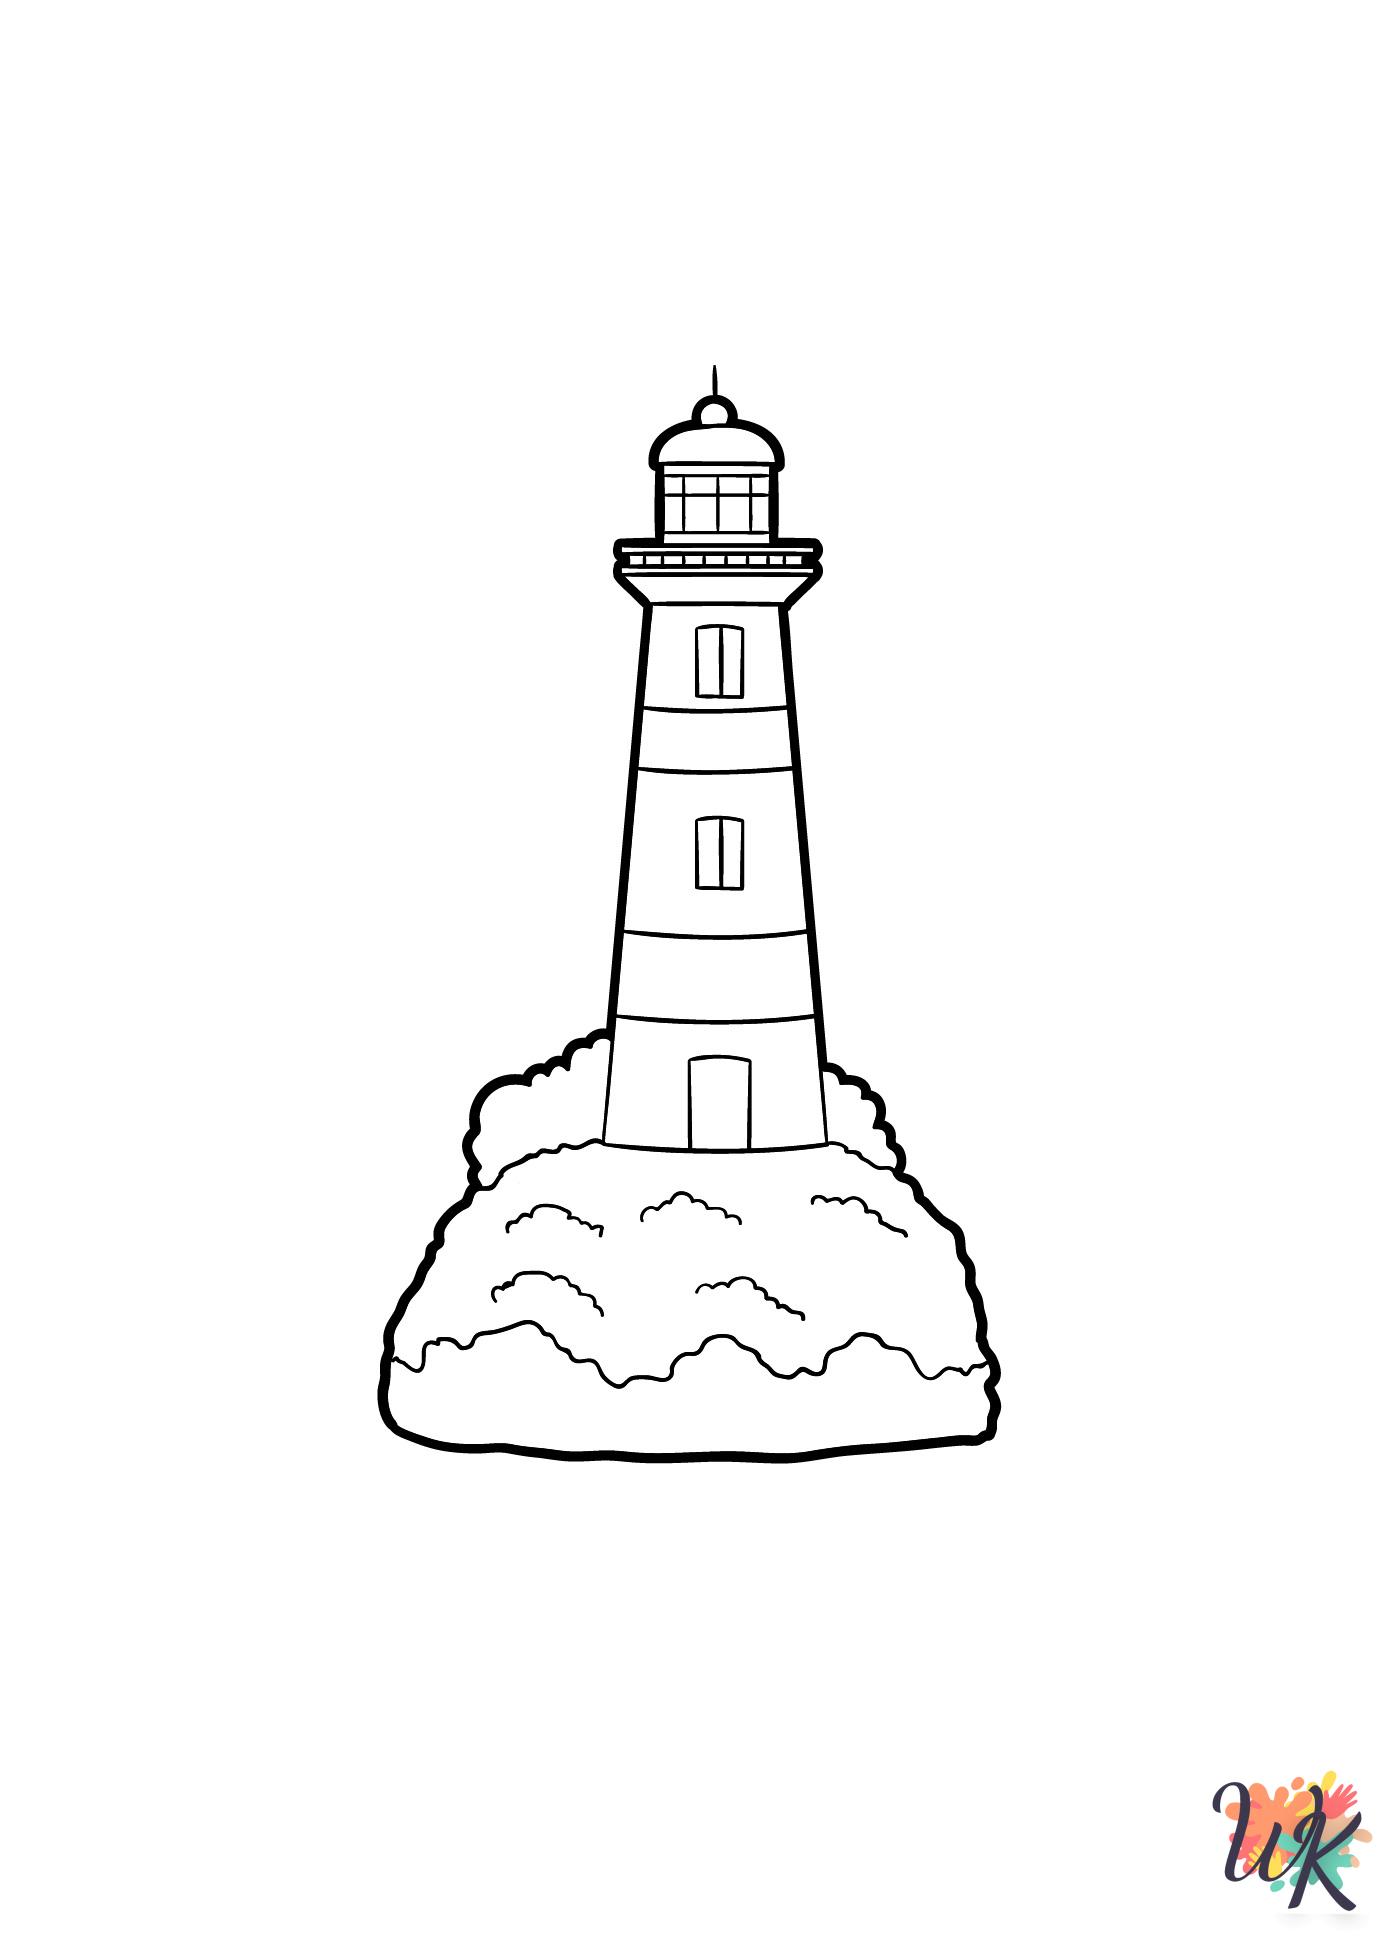 Lighthouse coloring pages easy